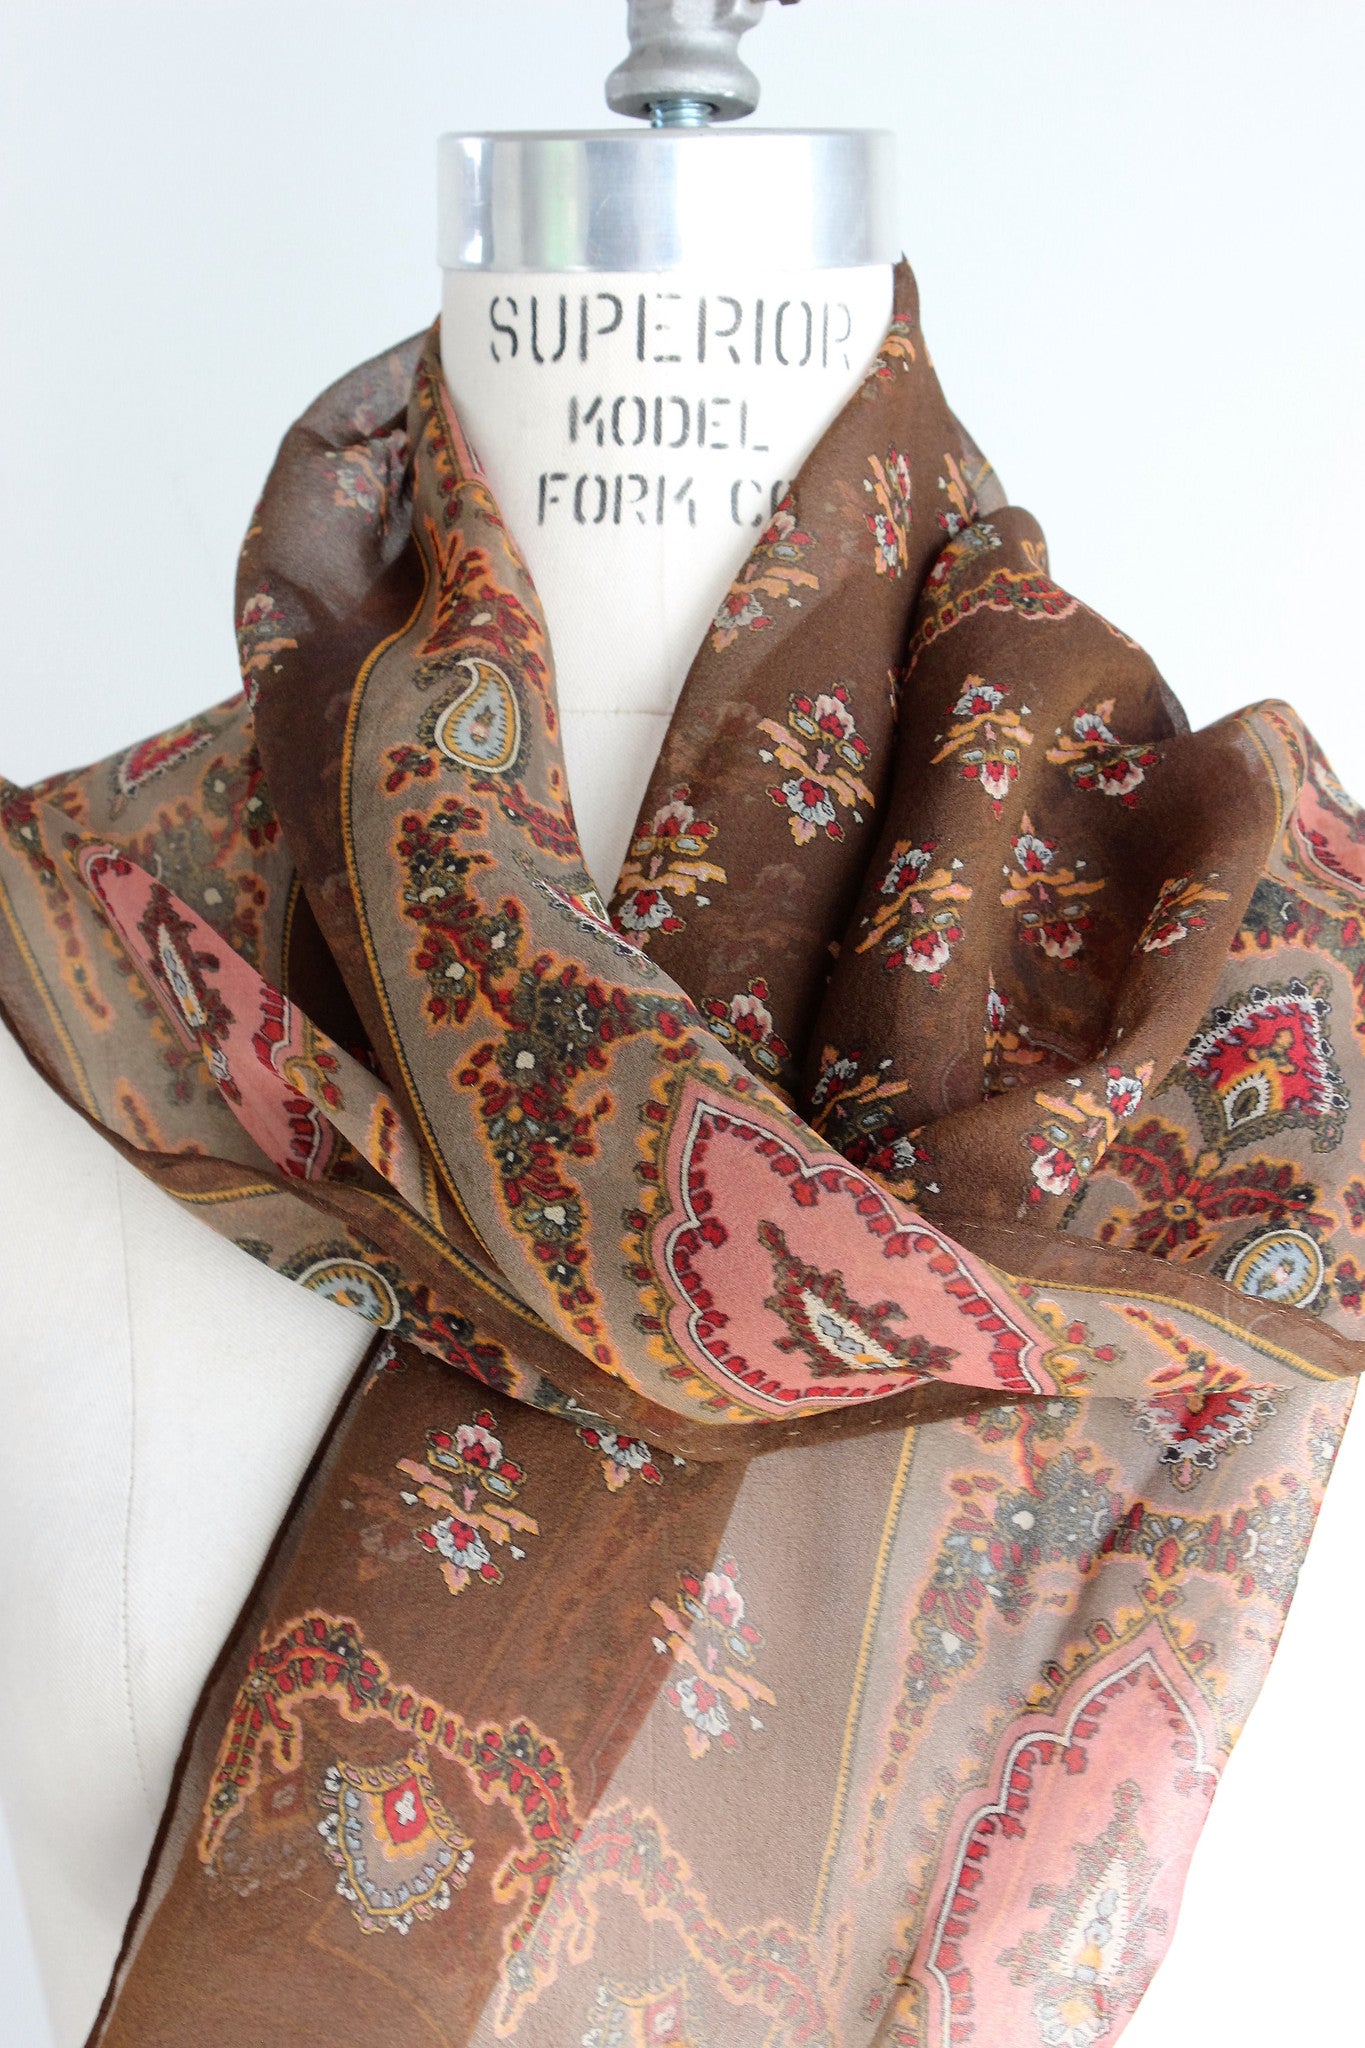 CLEARANCE: Vintage 1960s Scarf / Echo Scarf Sheer Brown Chiffon